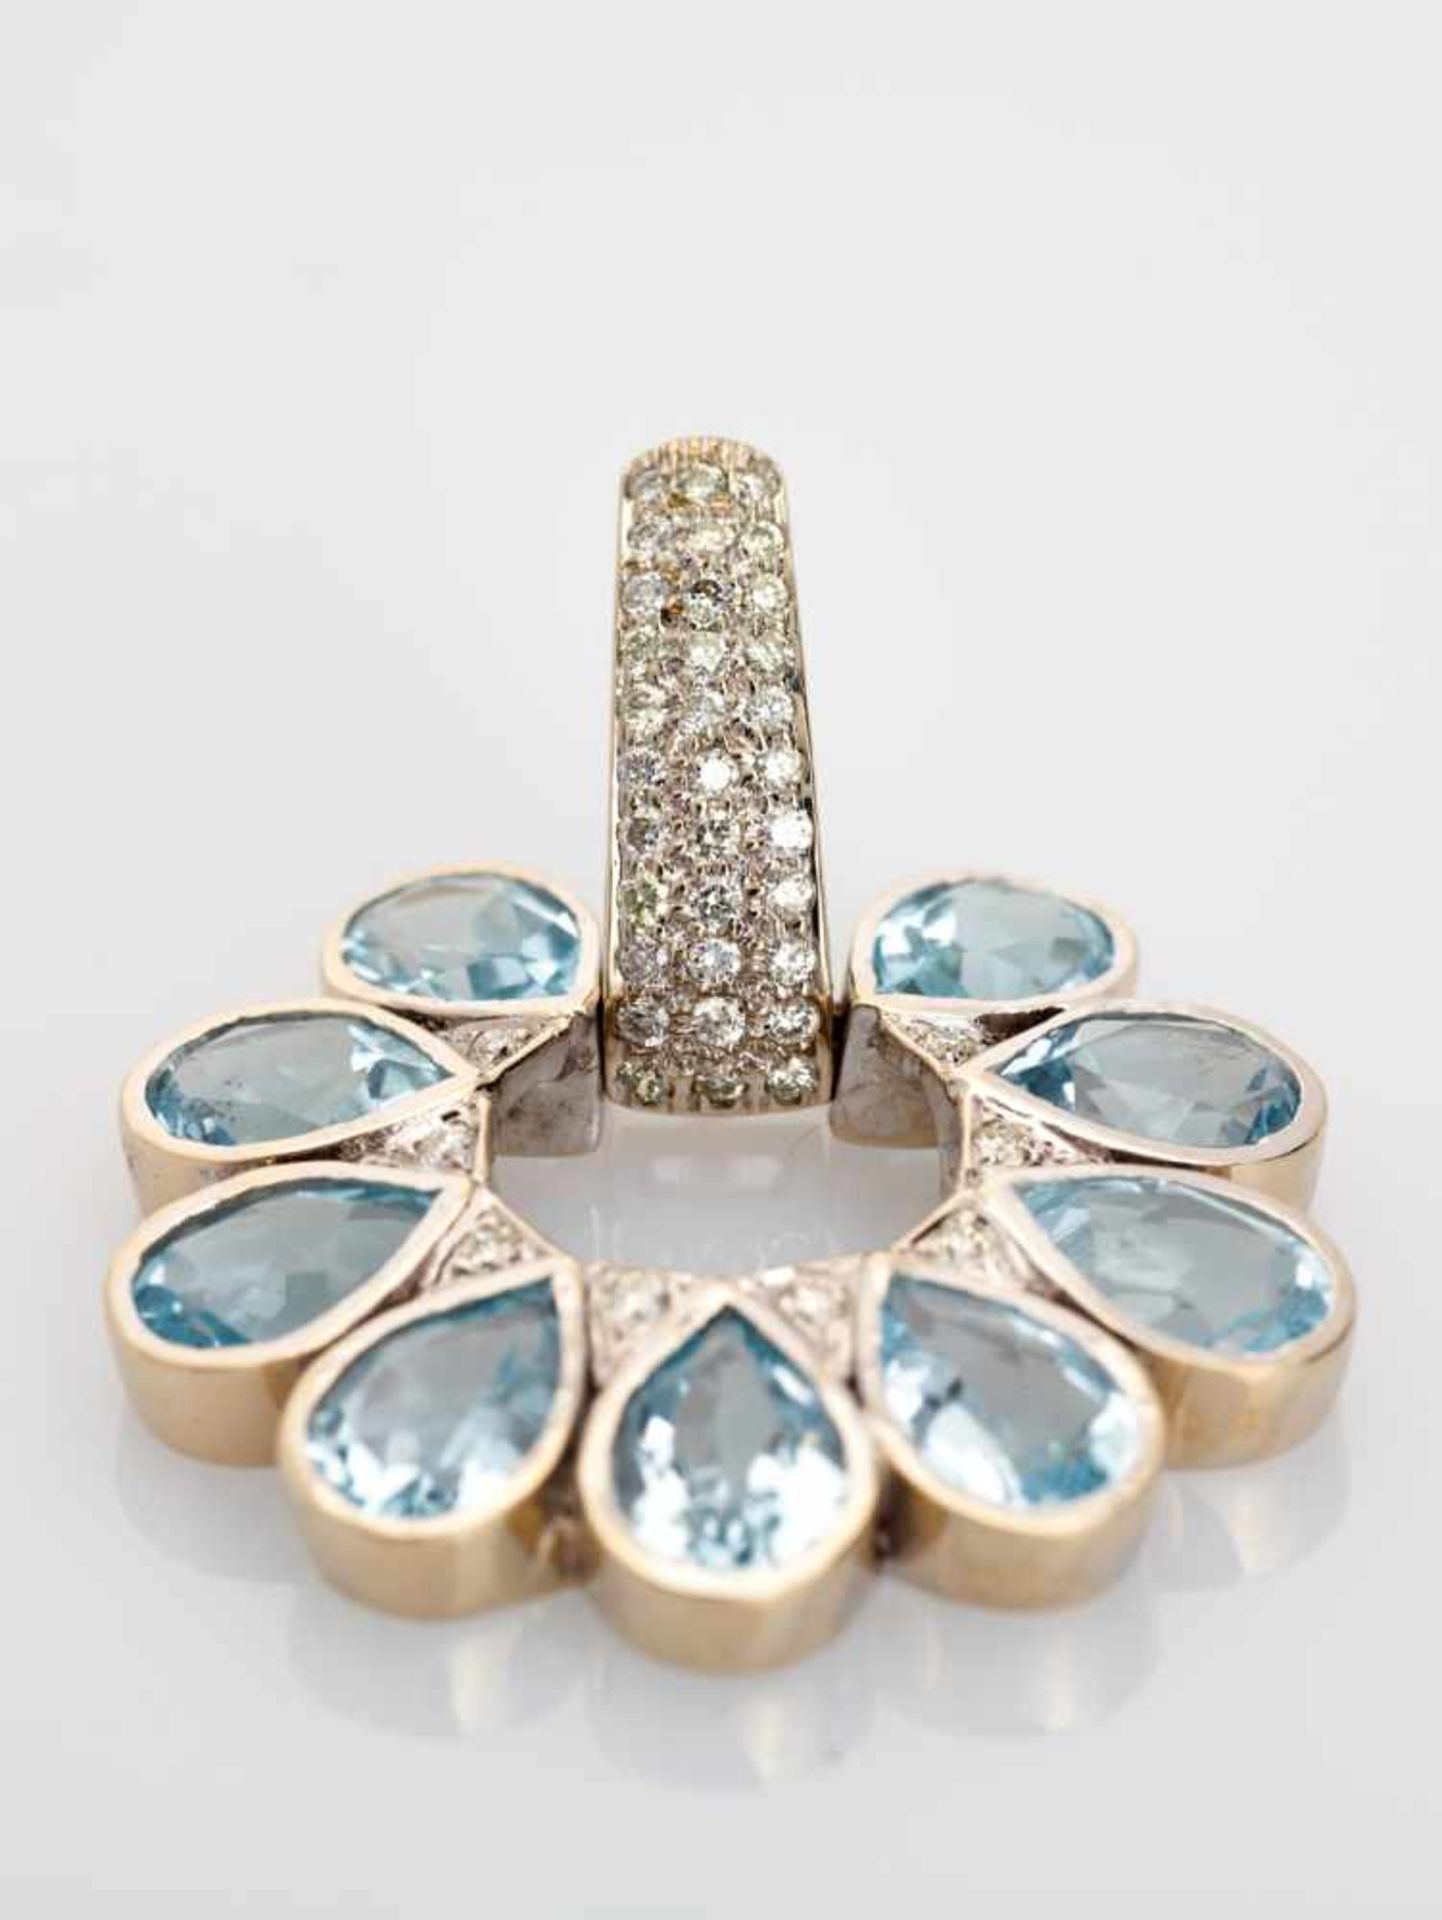 A PAIR OF 18 CARAT GOLD AND DIAMOND EARRINGS WITH AQUAMARINE DROPSincised at the sides with the - Image 4 of 6